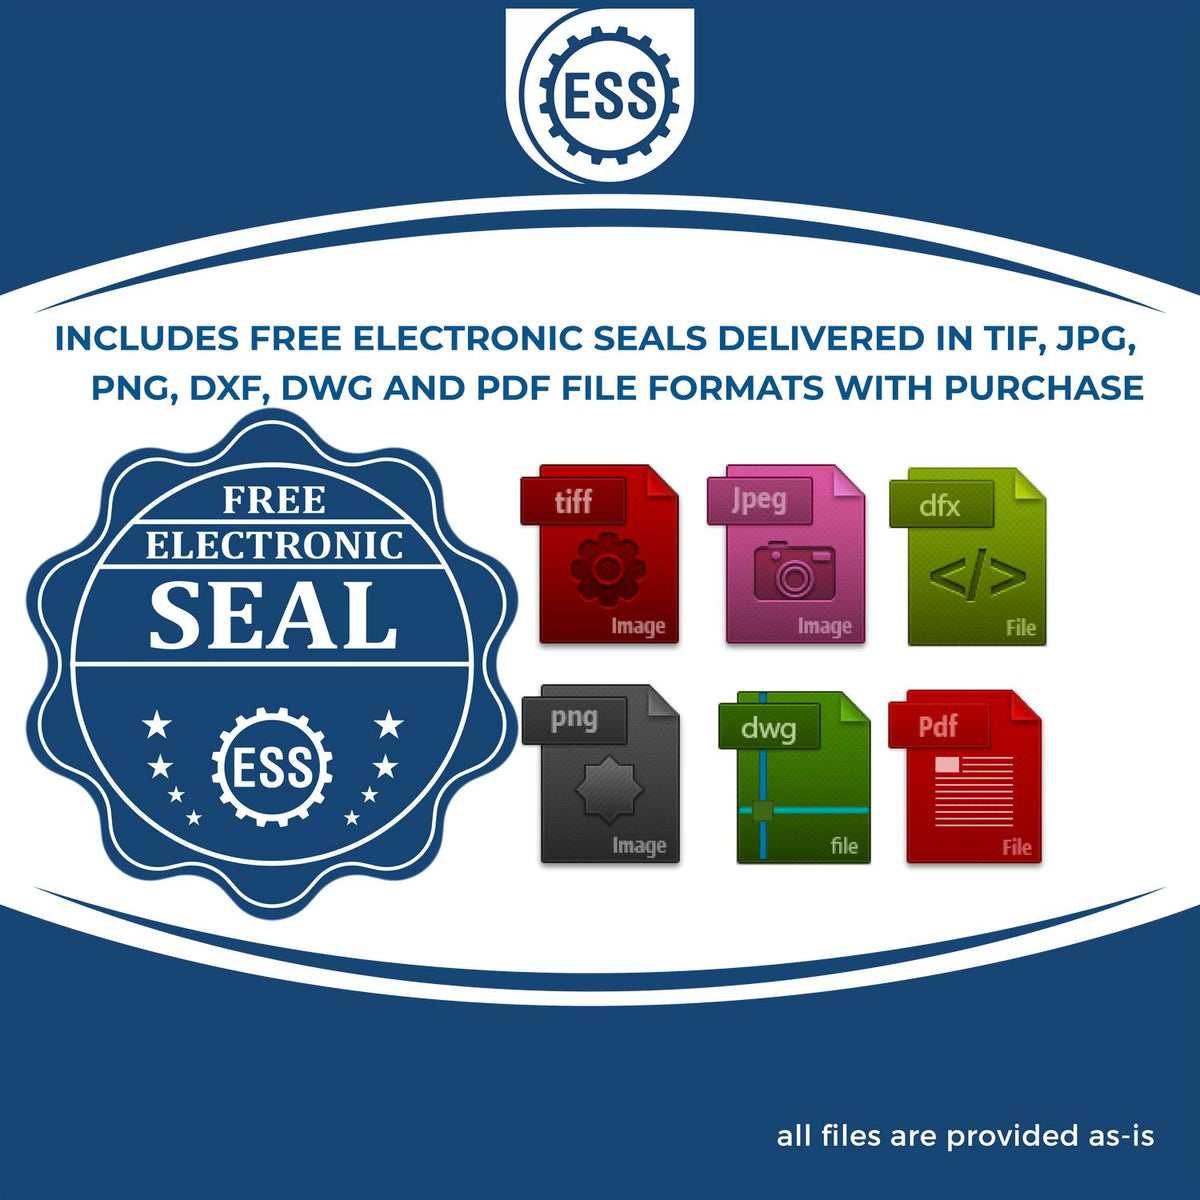 An infographic for the free electronic seal for the Slim Pre-Inked Virginia Professional Engineer Seal Stamp illustrating the different file type icons such as DXF, DWG, TIF, JPG and PNG.